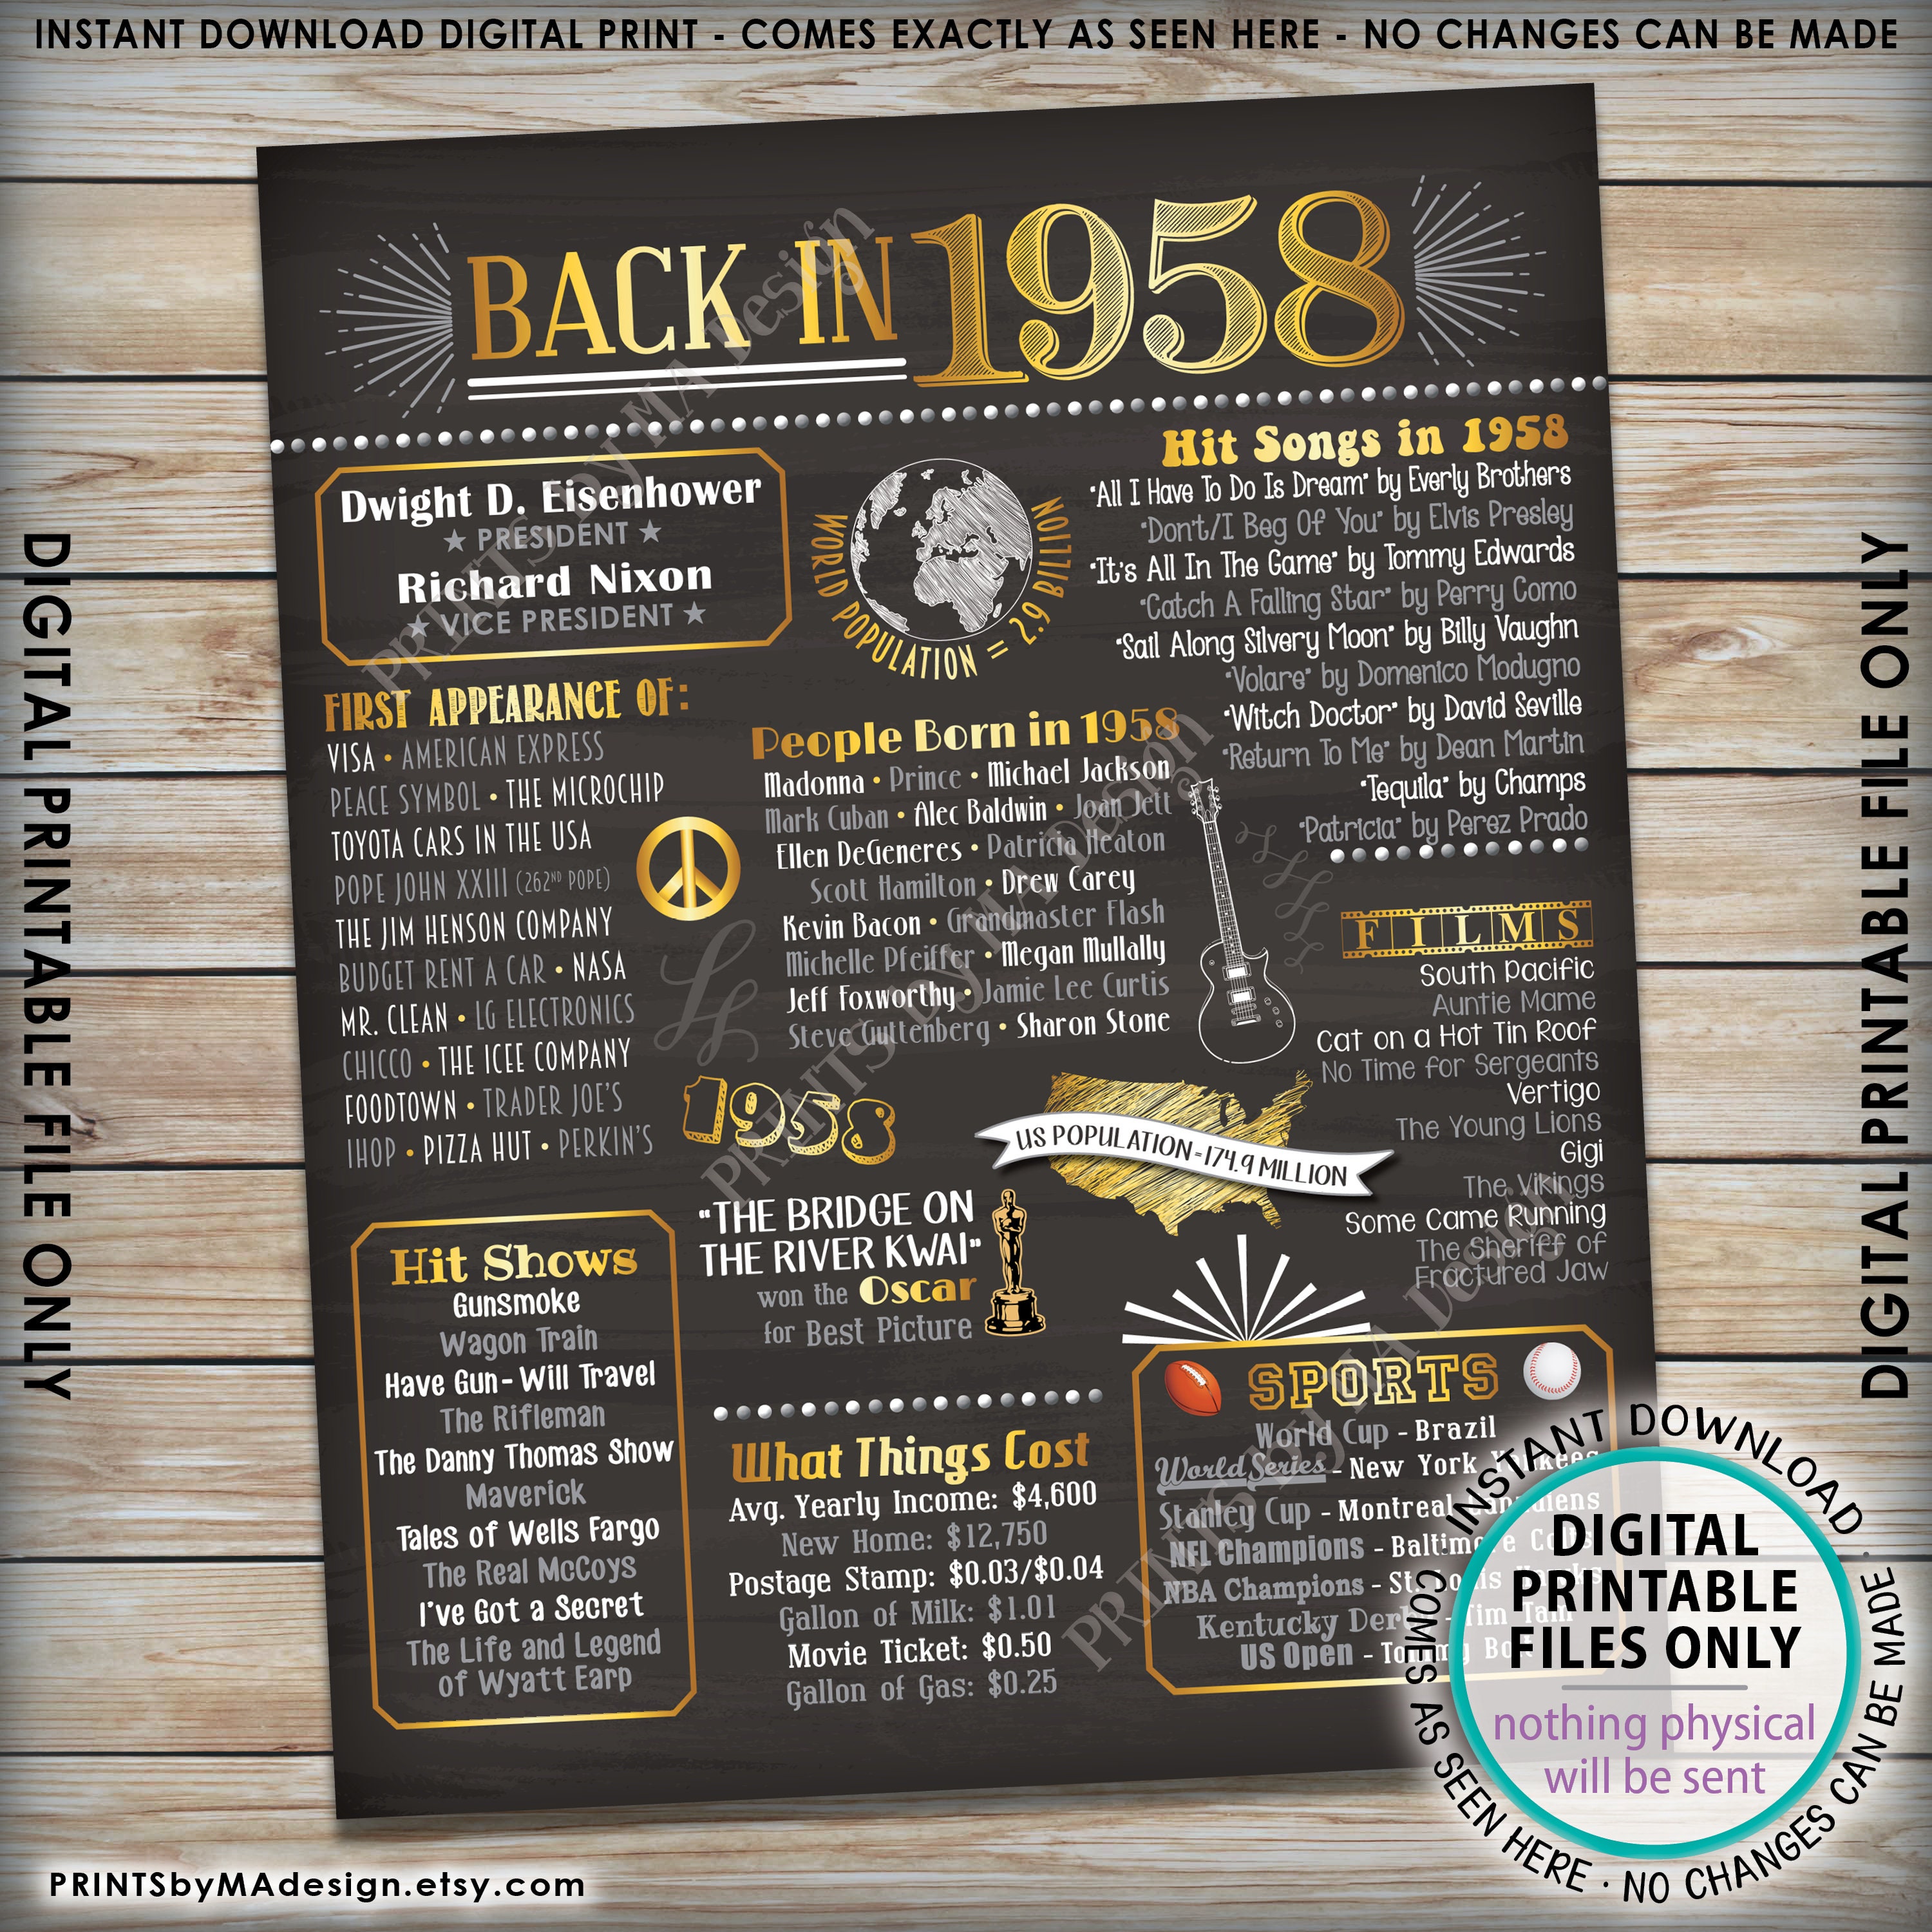 1958-flashback-poster-flashback-to-1958-usa-history-back-in-1958